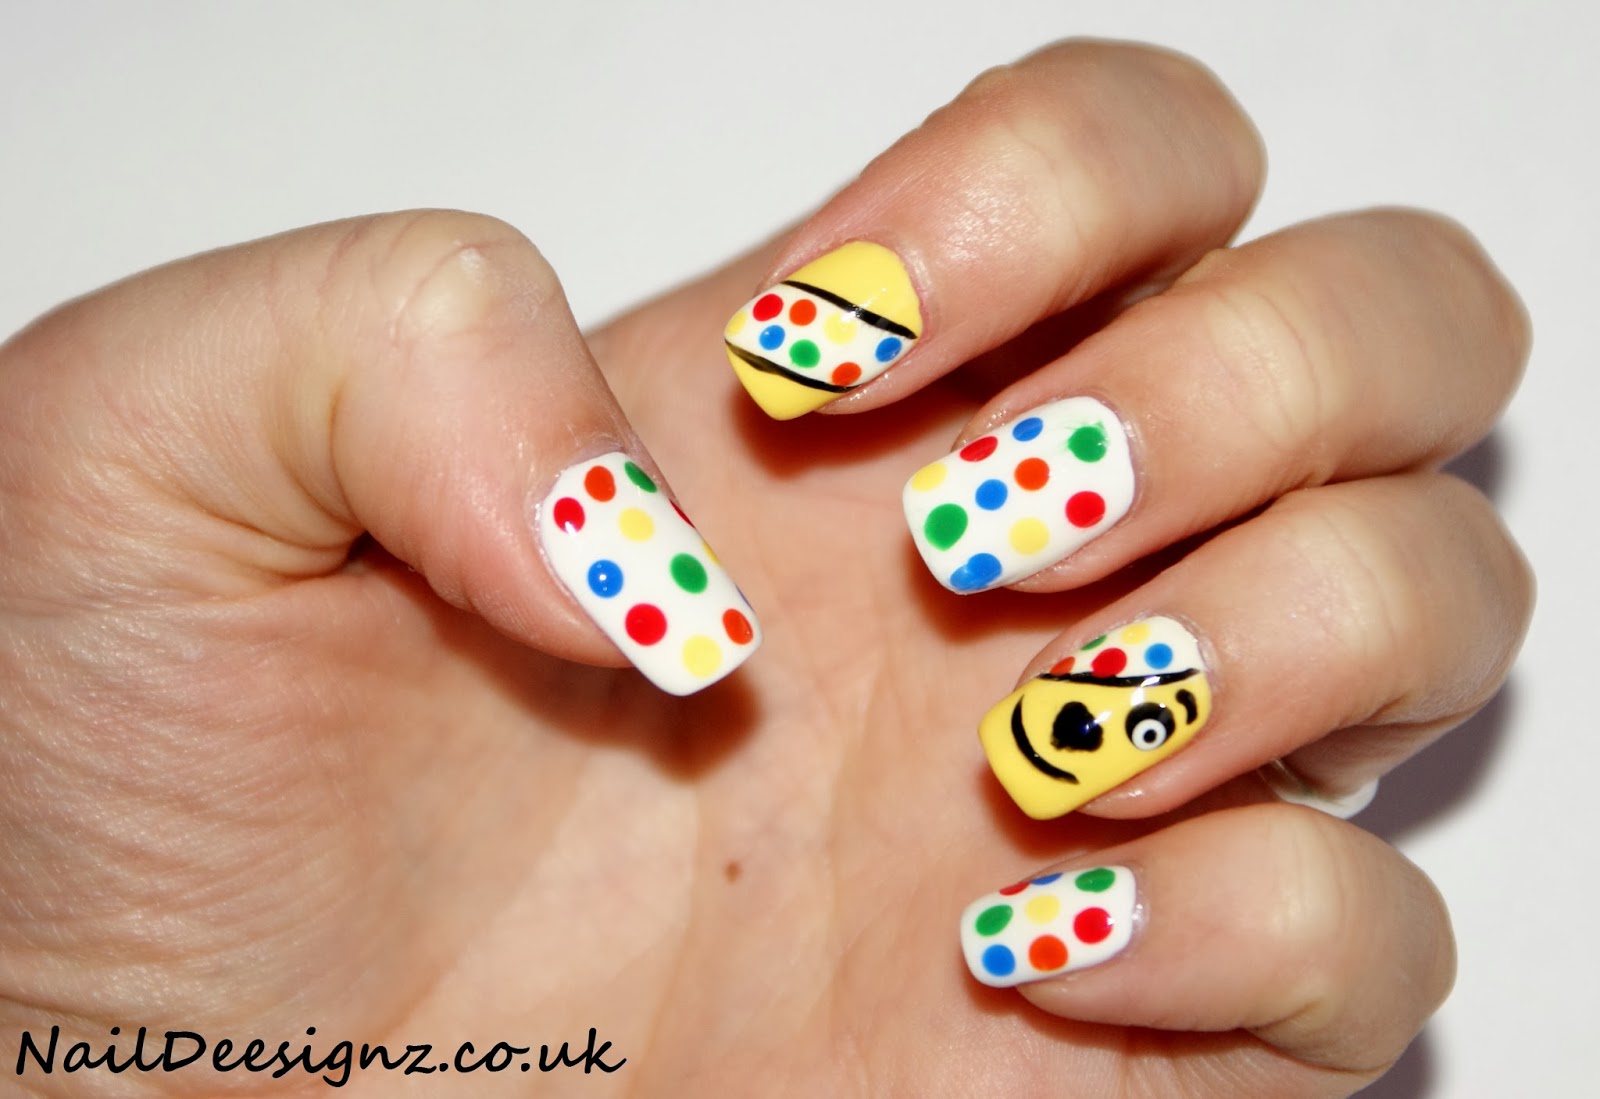 1. Easy Nail Art for Kids - wide 4